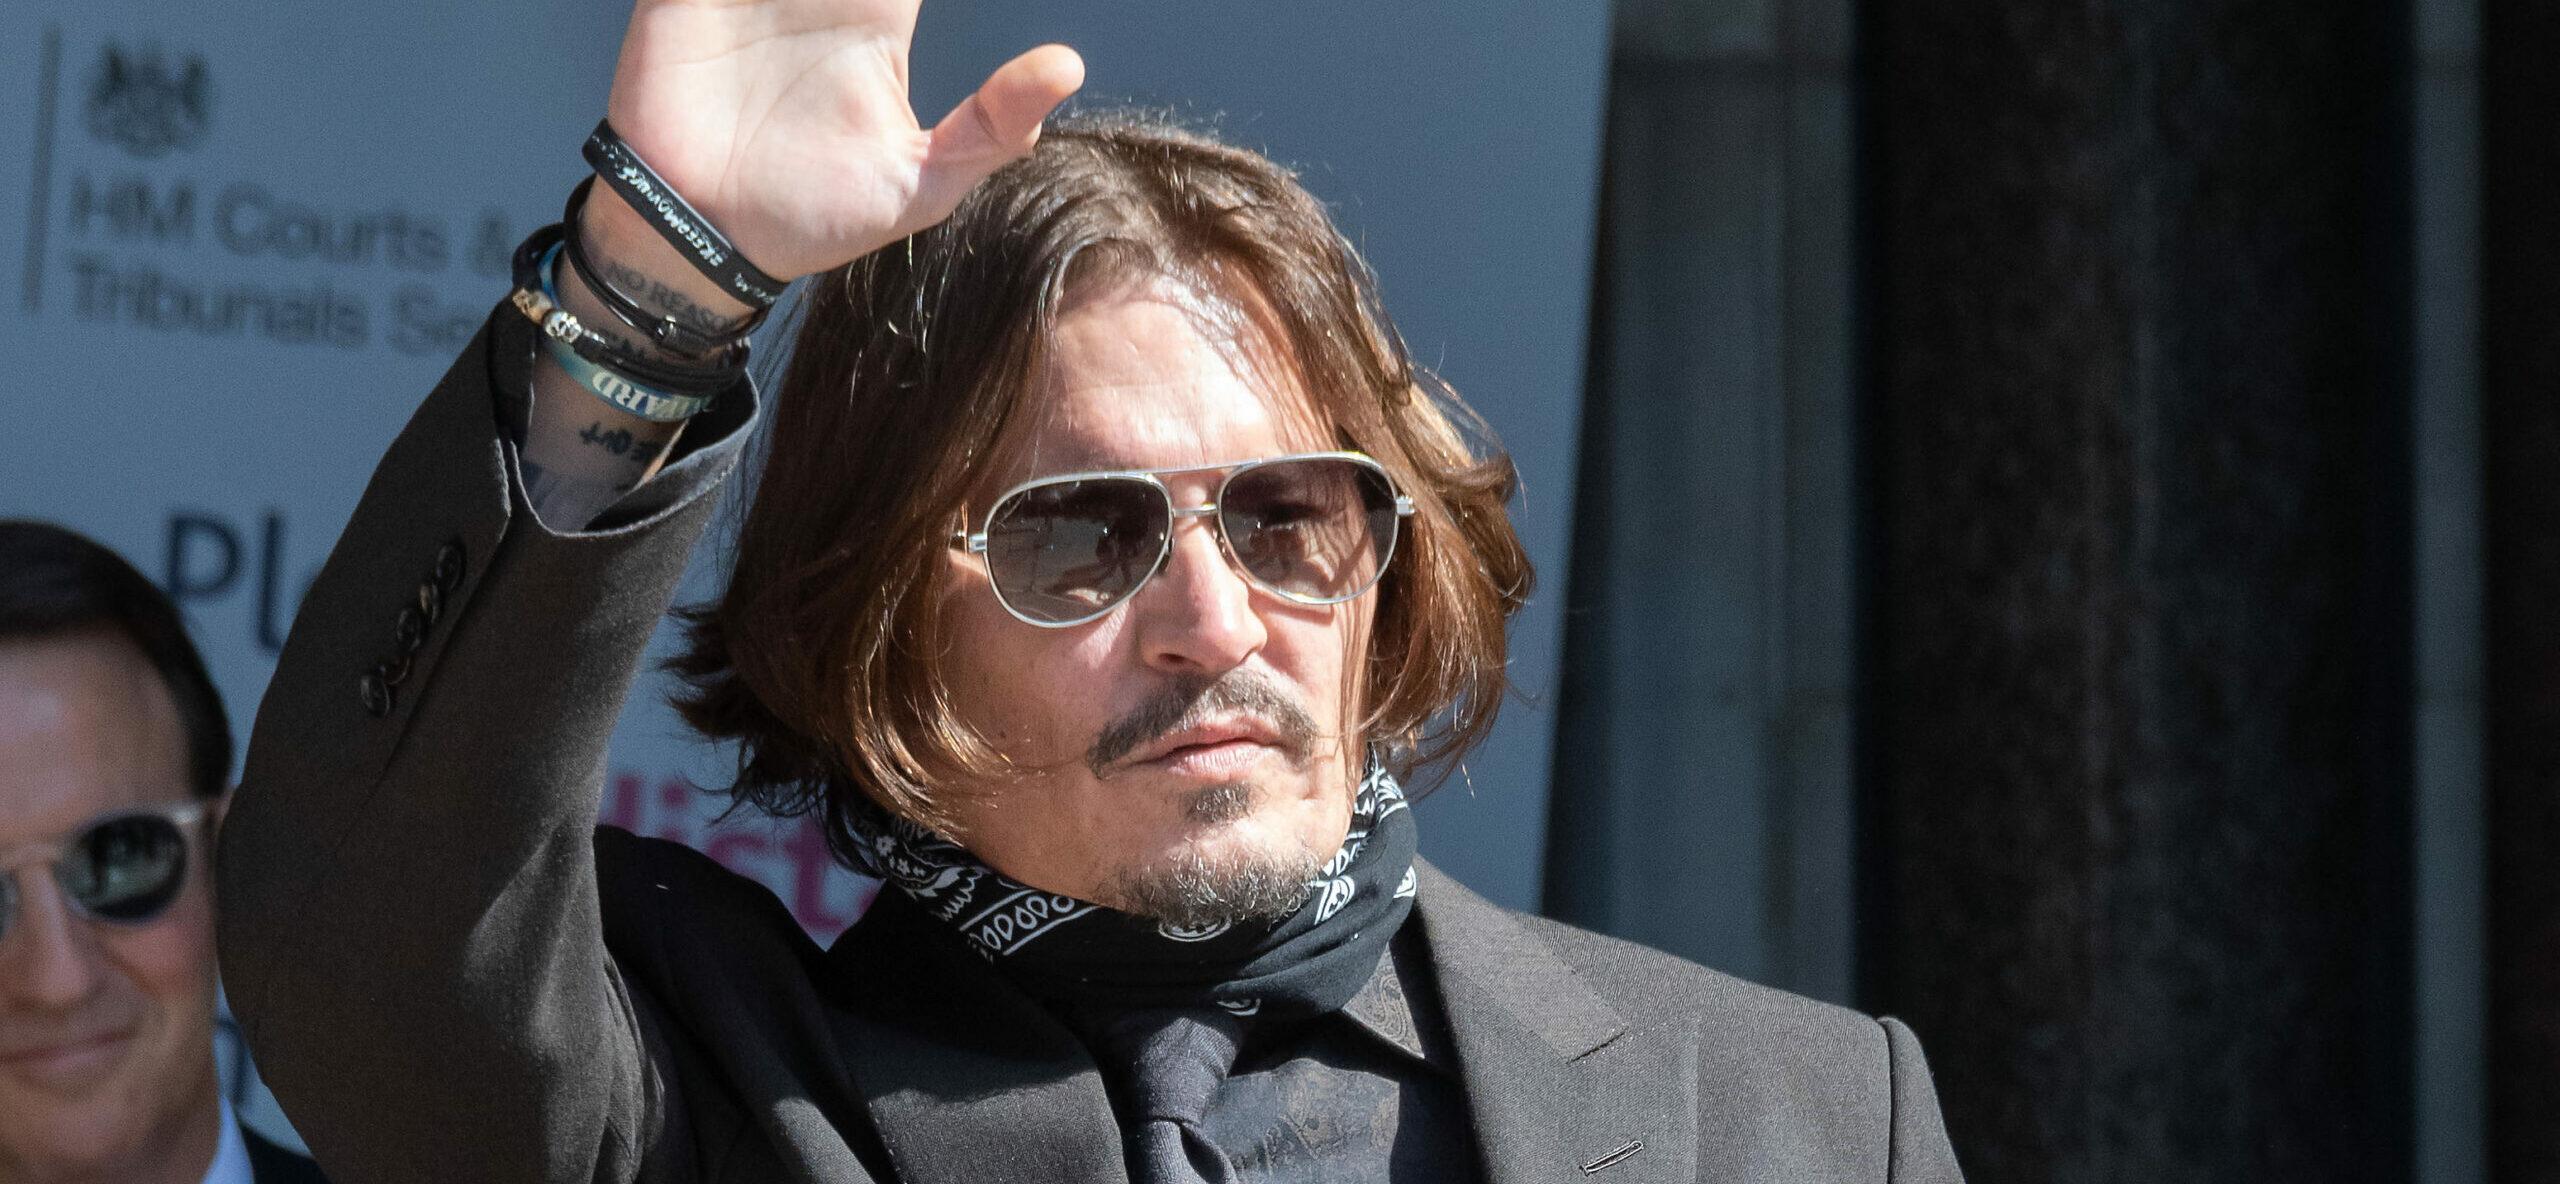 Johnny Depp at The Royal Courts of Justice, London, UK - 22 July 2020